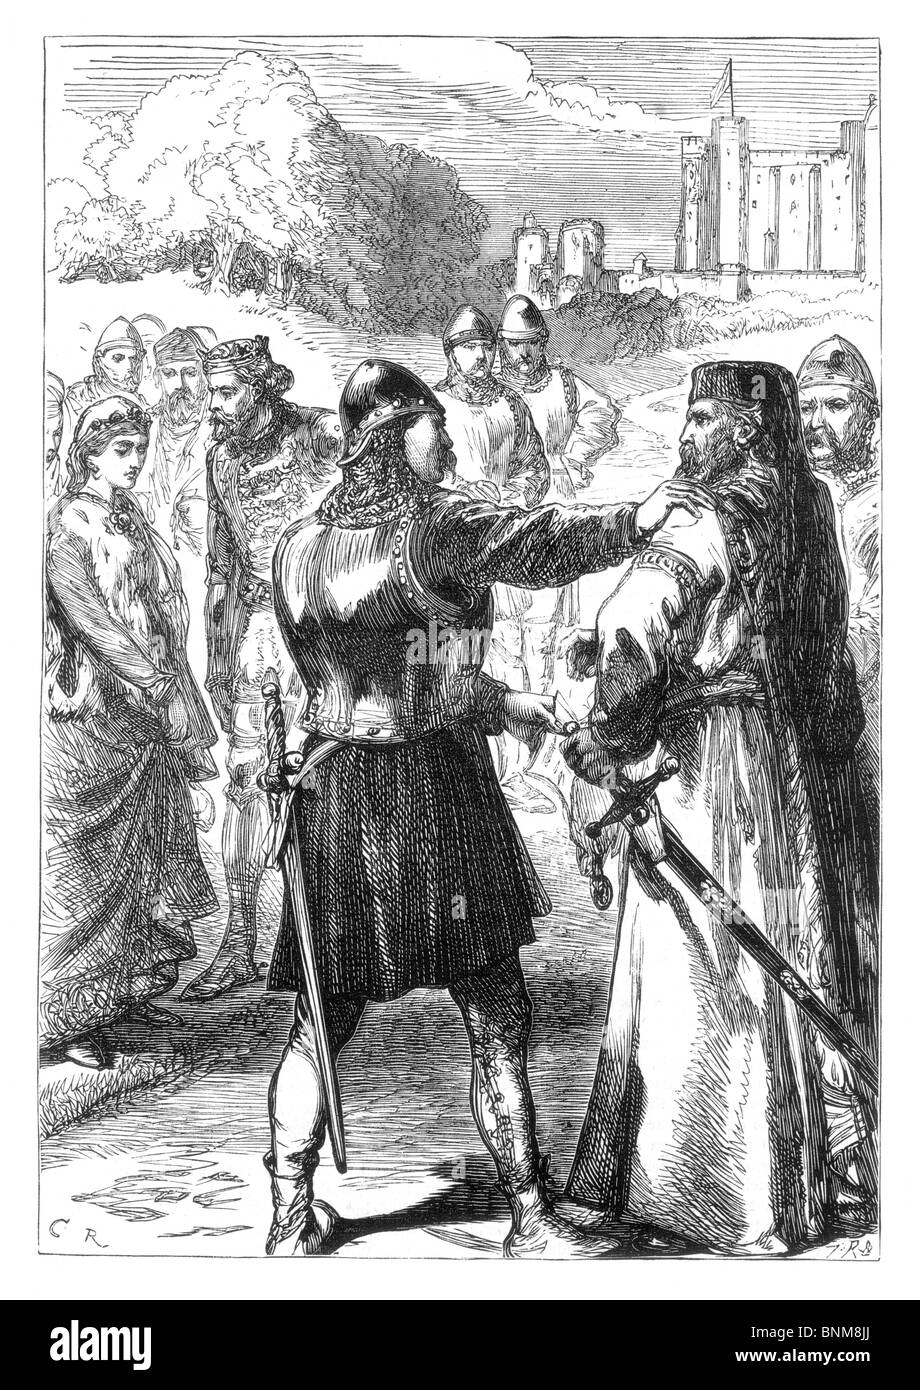 Black and White Illustration of the Arrest of the Duke of Gloucester, July 1387 during the tyranny of King Richard II of England Stock Photo